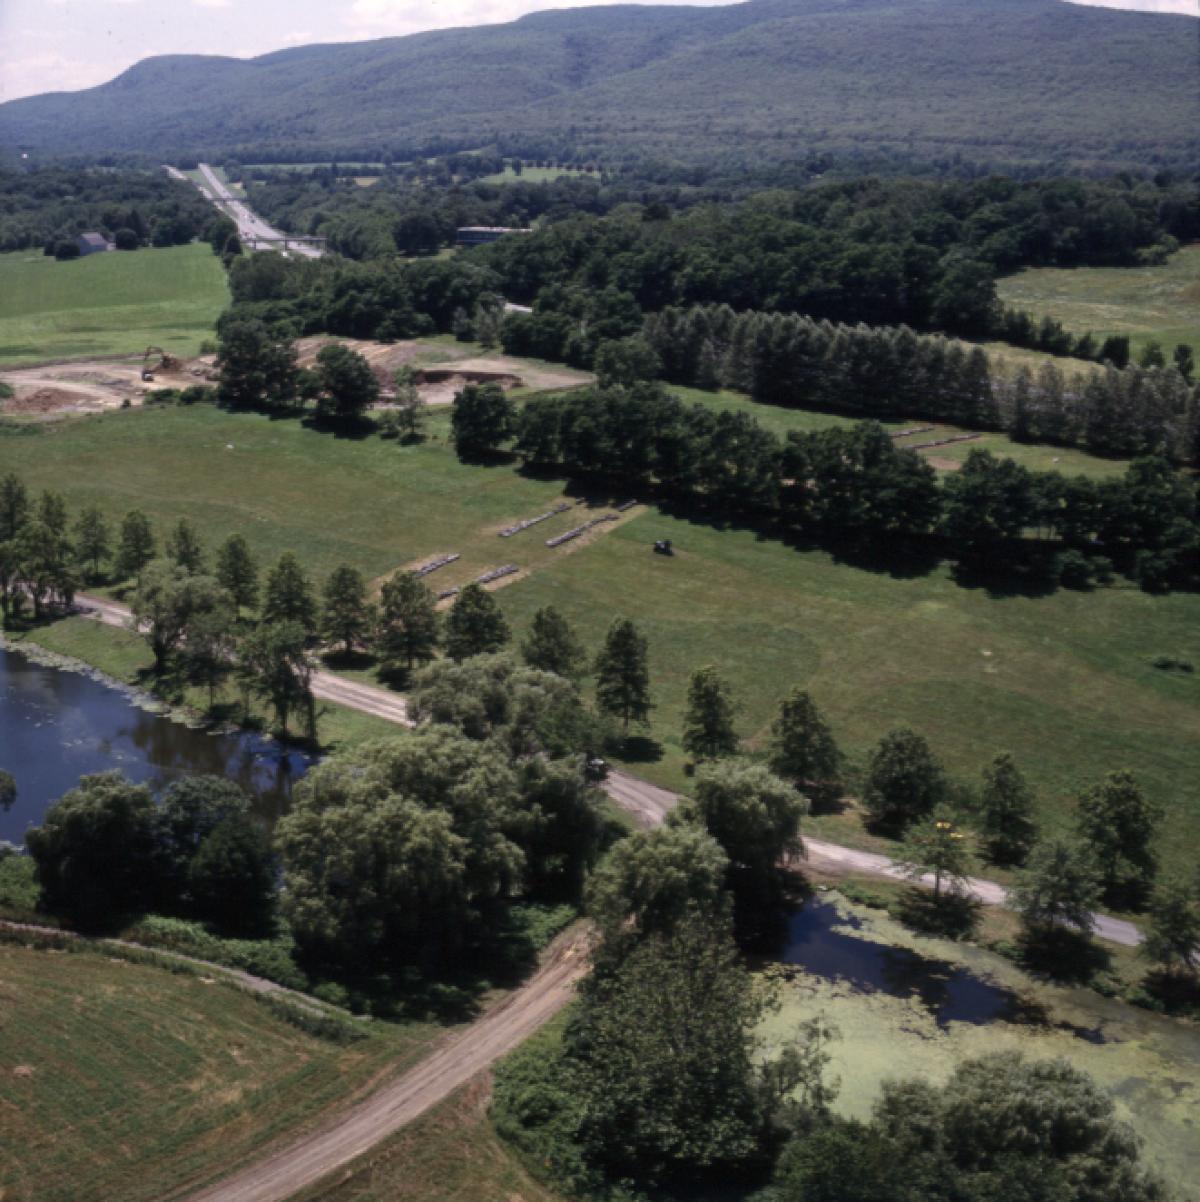 Storm King Aerial View, 1996